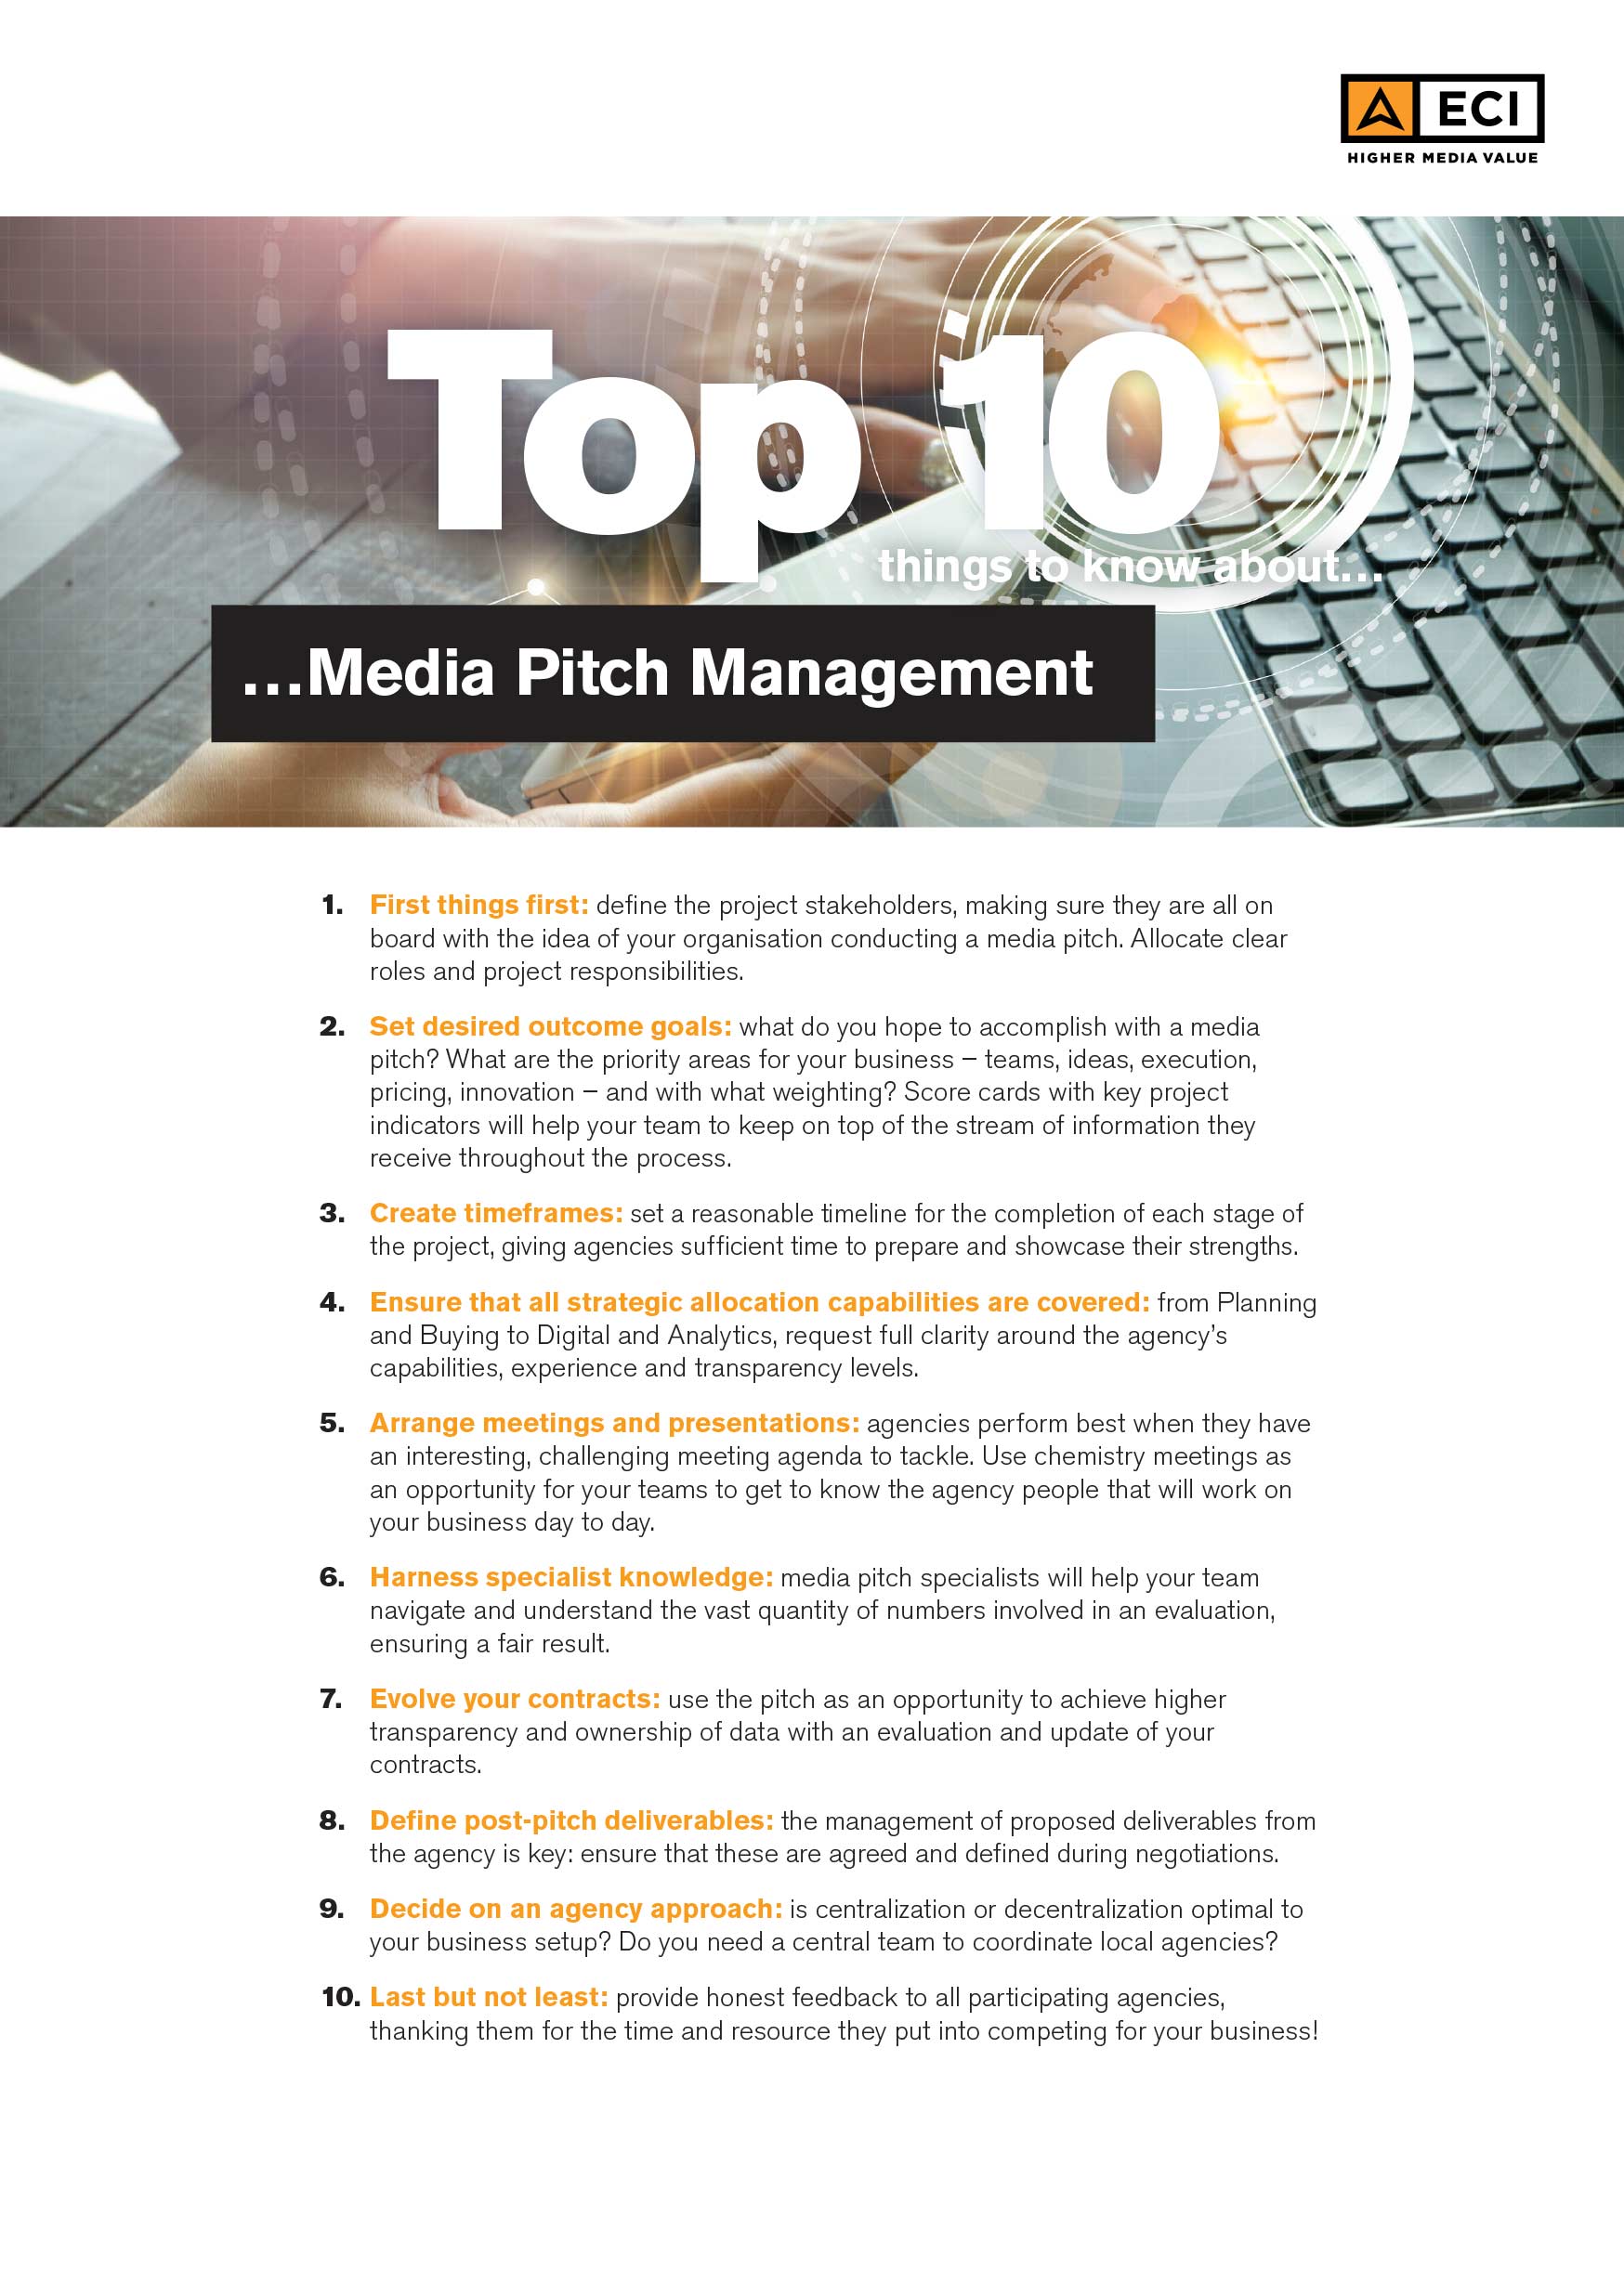 Top 10 things to know about Media Pitch Management